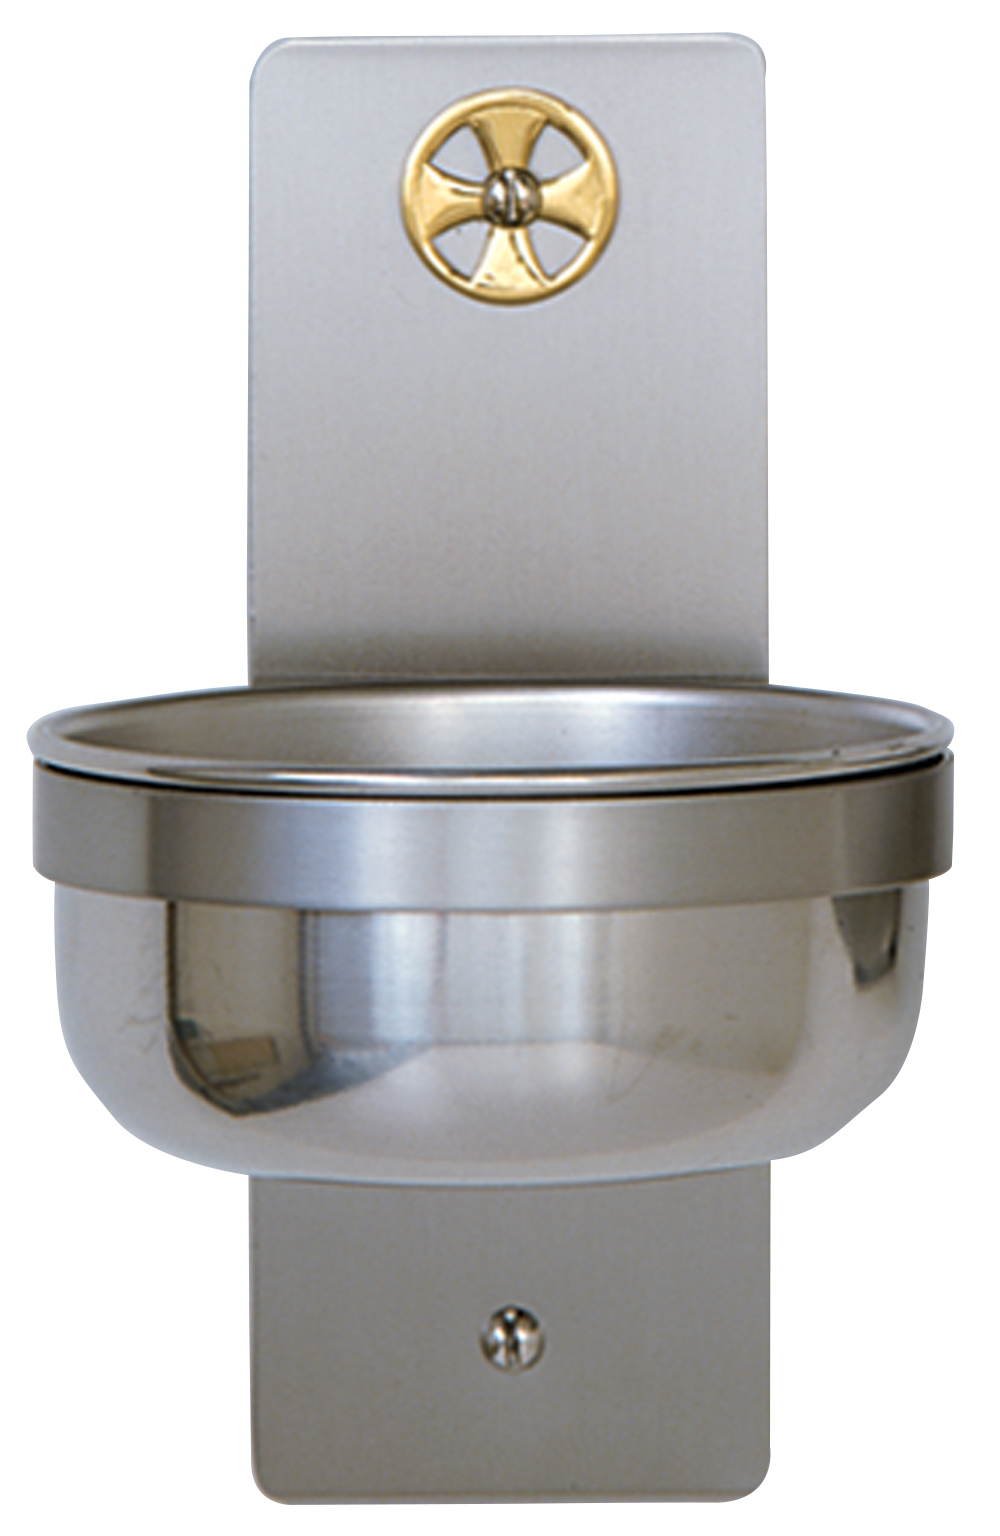 Holy Water Font Stainless Steel 4 1/4 inch Bowl